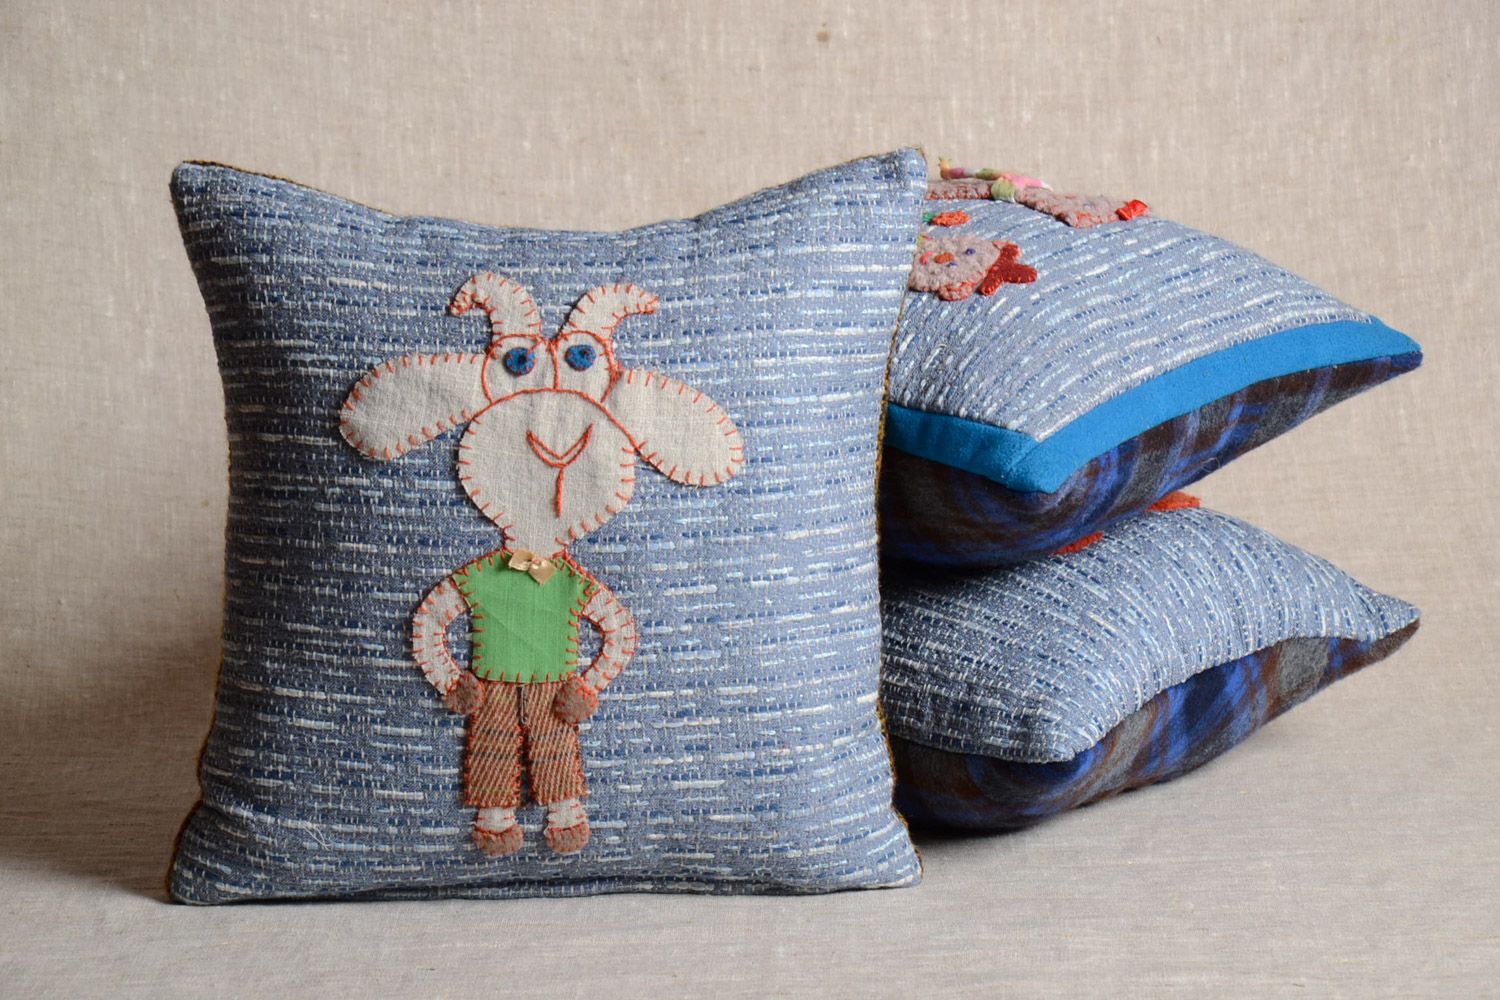 Children's handmade soft cushion with applique work for upholstered furniture decor photo 1